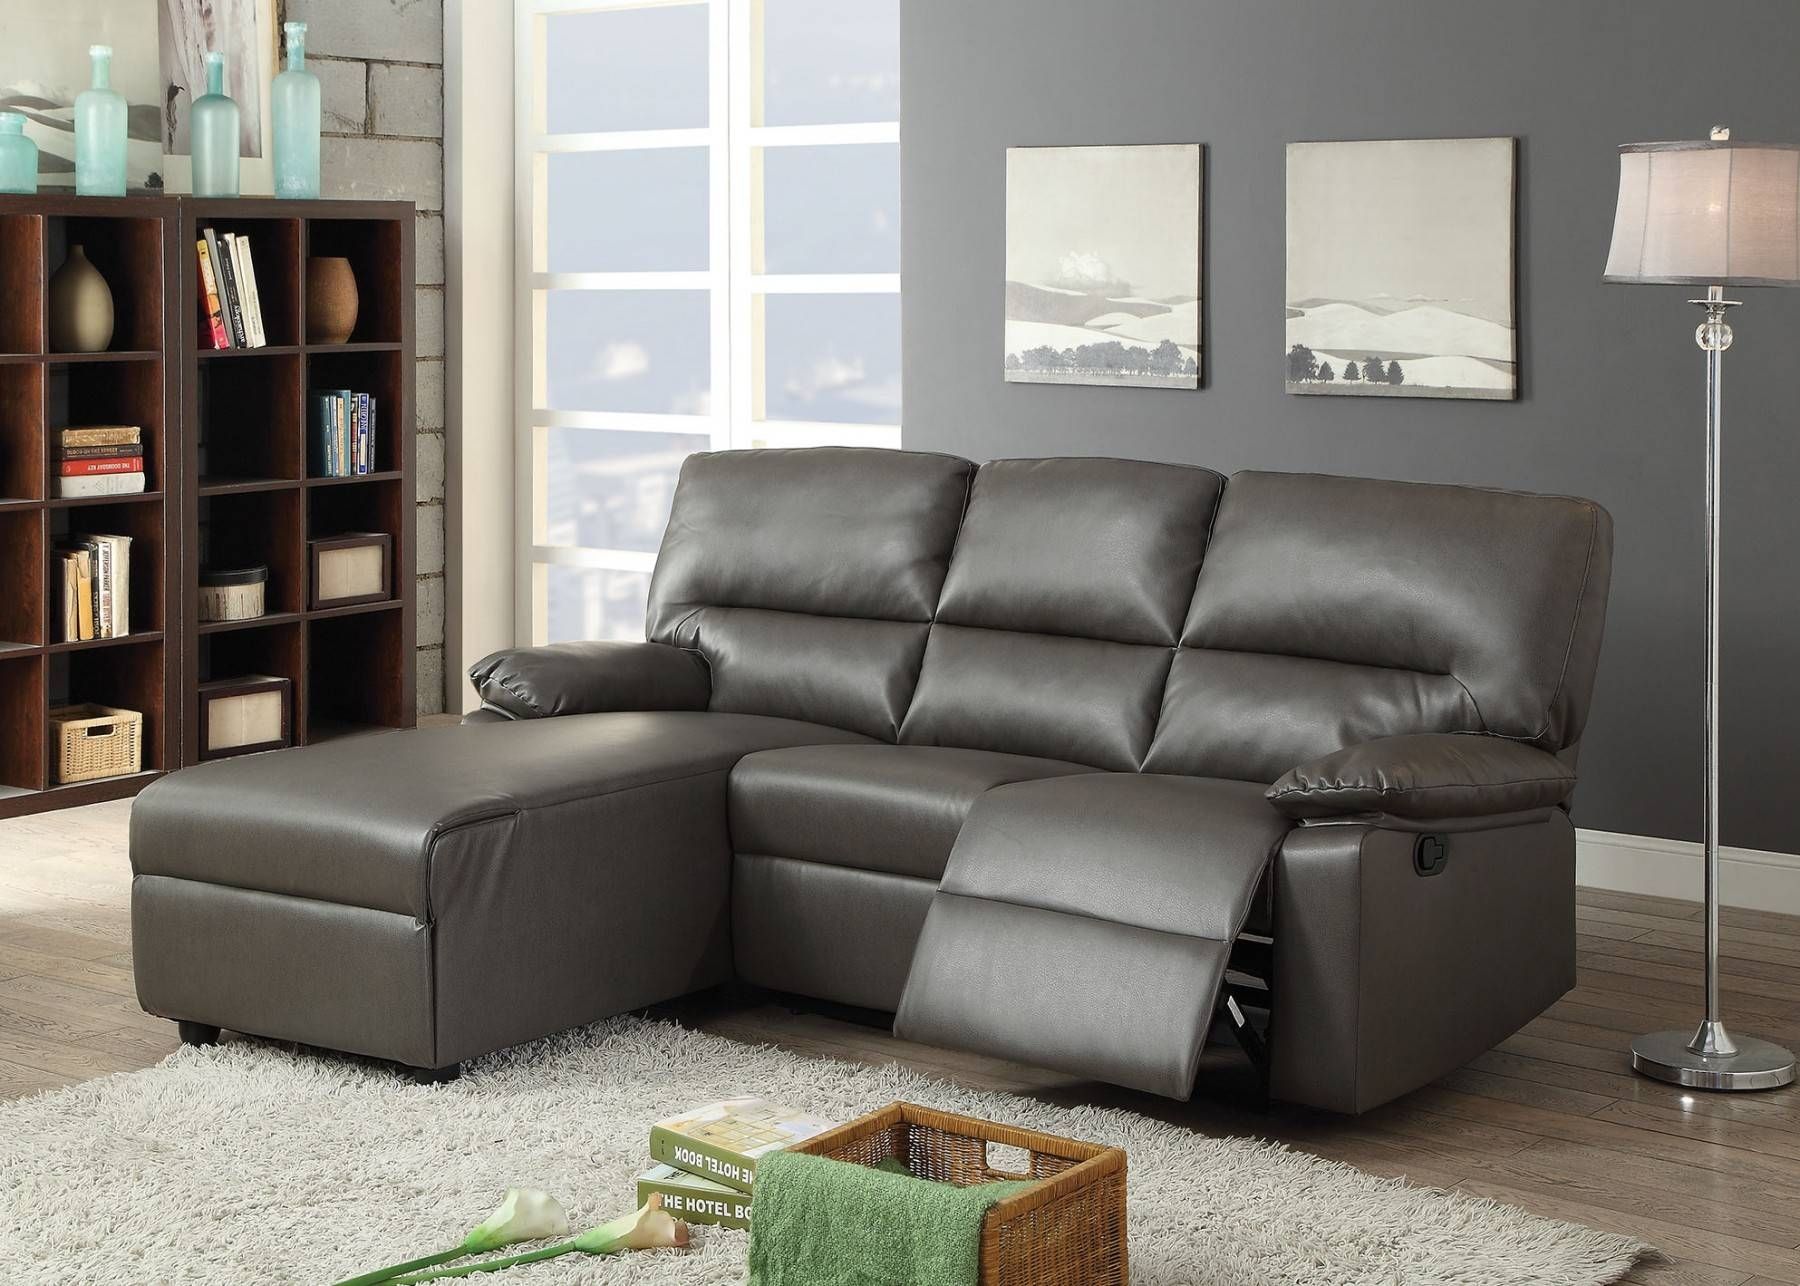 Elegant Leather Motion Sectional Sofa 52 On Abbyson Living Intended For Abbyson Living Charlotte Beige Sectional Sofa And Ottoman (View 15 of 30)